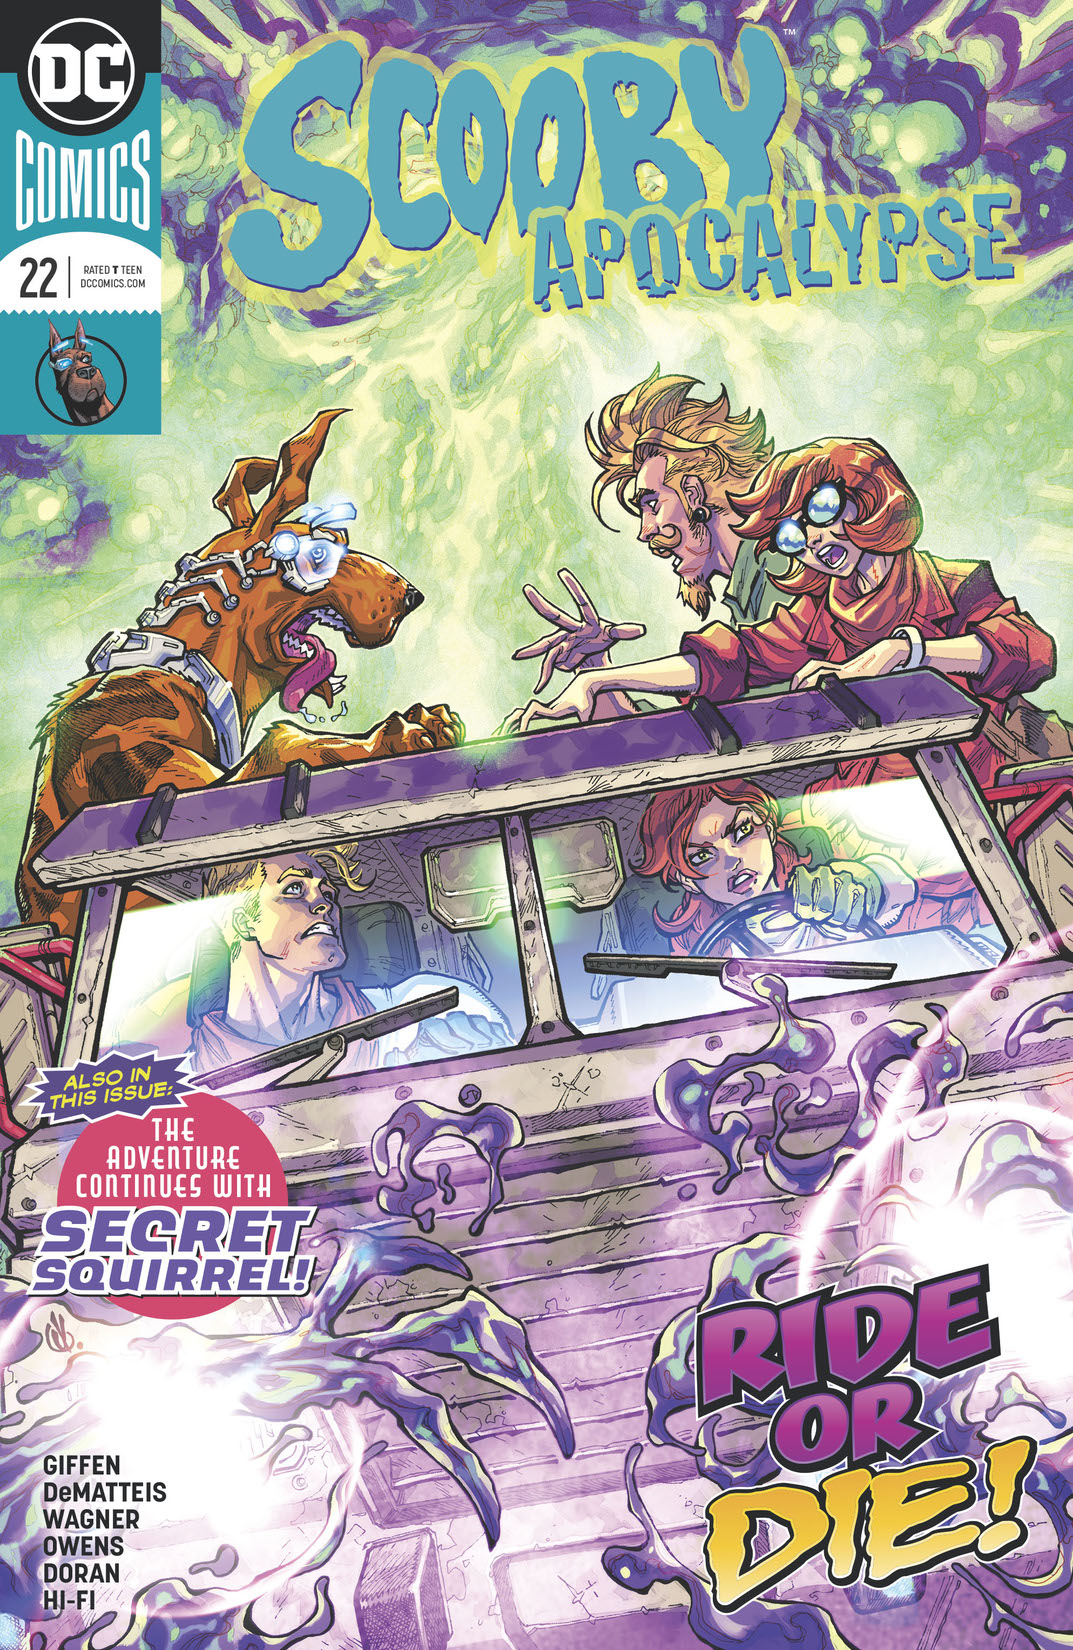 Scooby Apocalypse #22 preview images